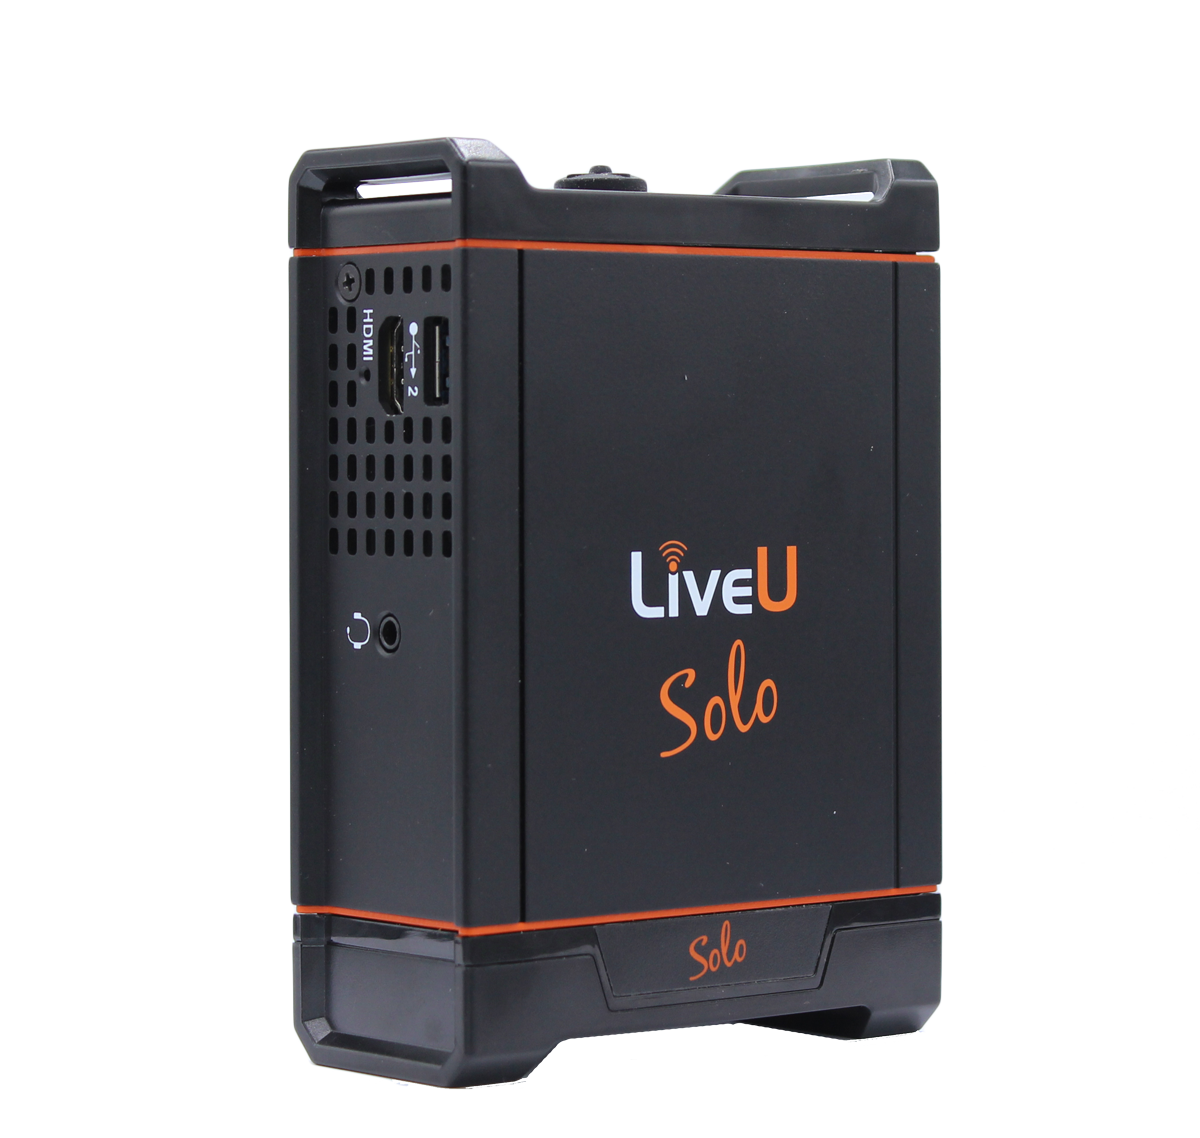 Roland V-1HD and LiveU Solo HDMI Video Encoder with 1 year LRT Virtual Cloud Server